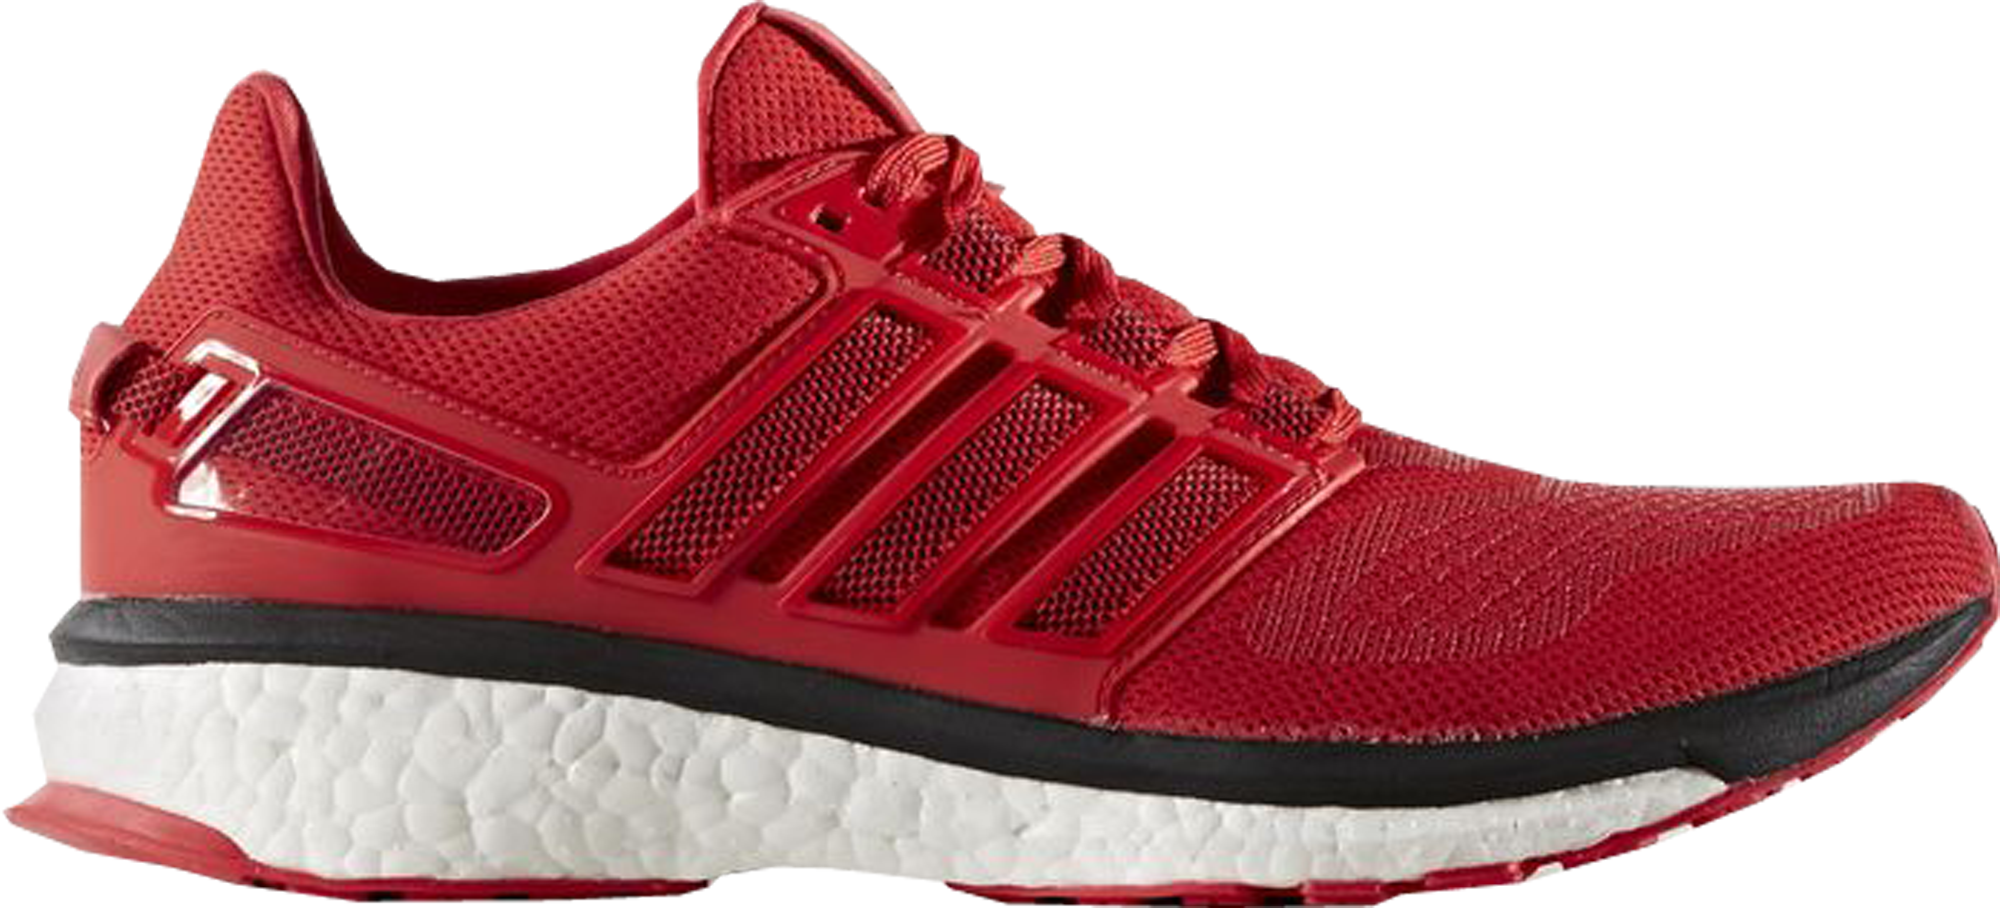 energy boost red